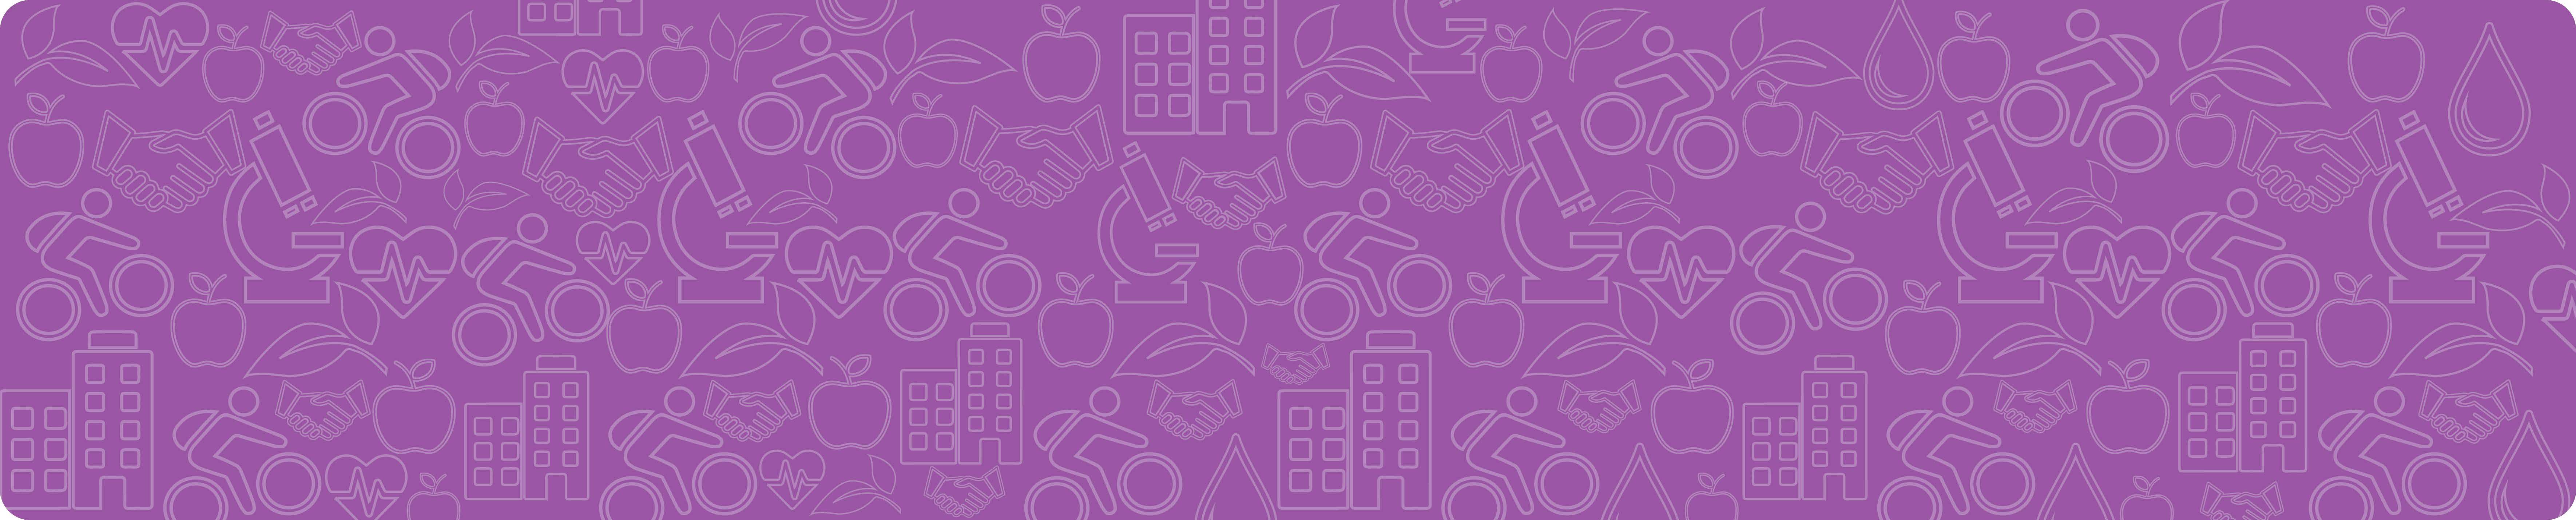 Sustainability icons with purple background